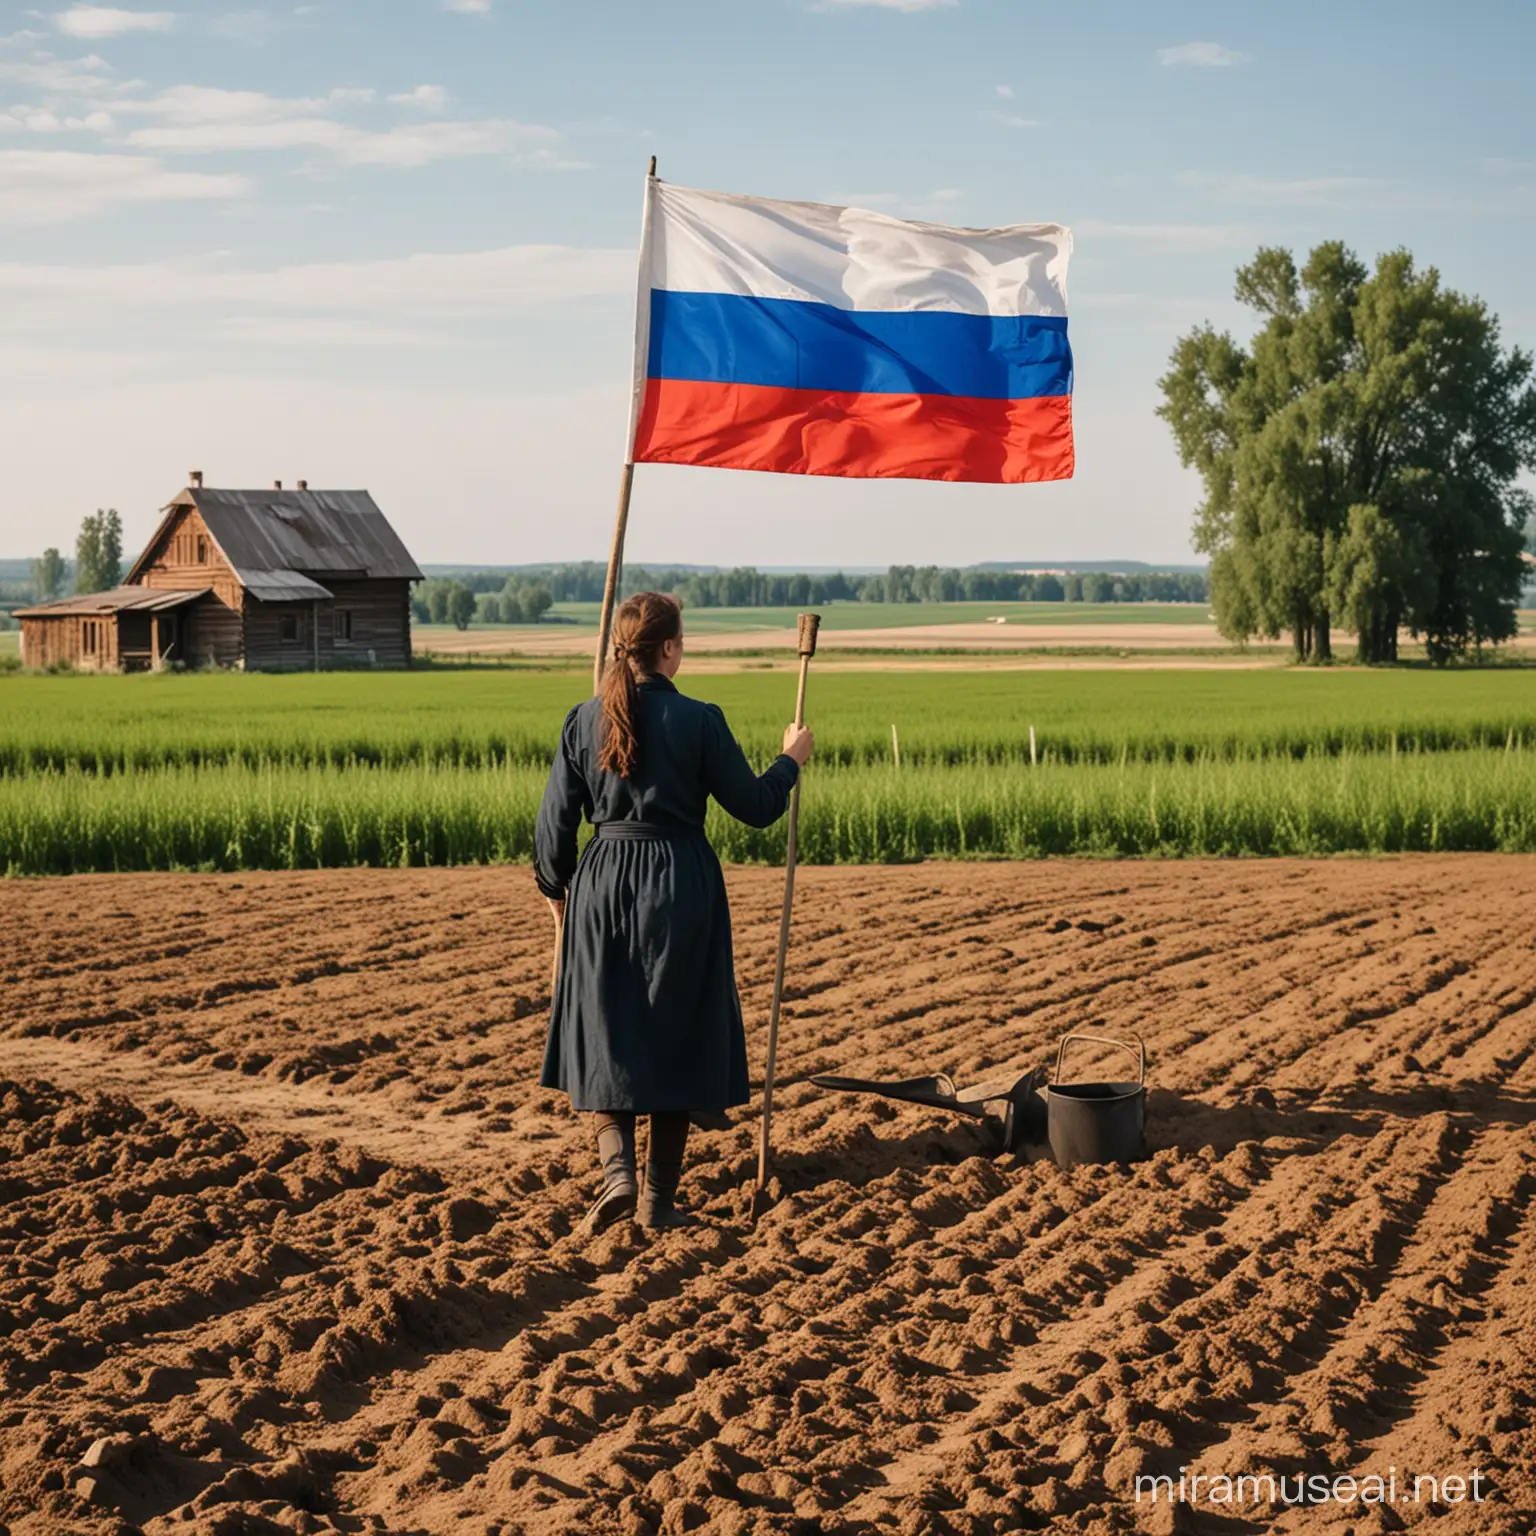 An optimistic pioneer plants a russian flag in a field with a farmhouse in the background